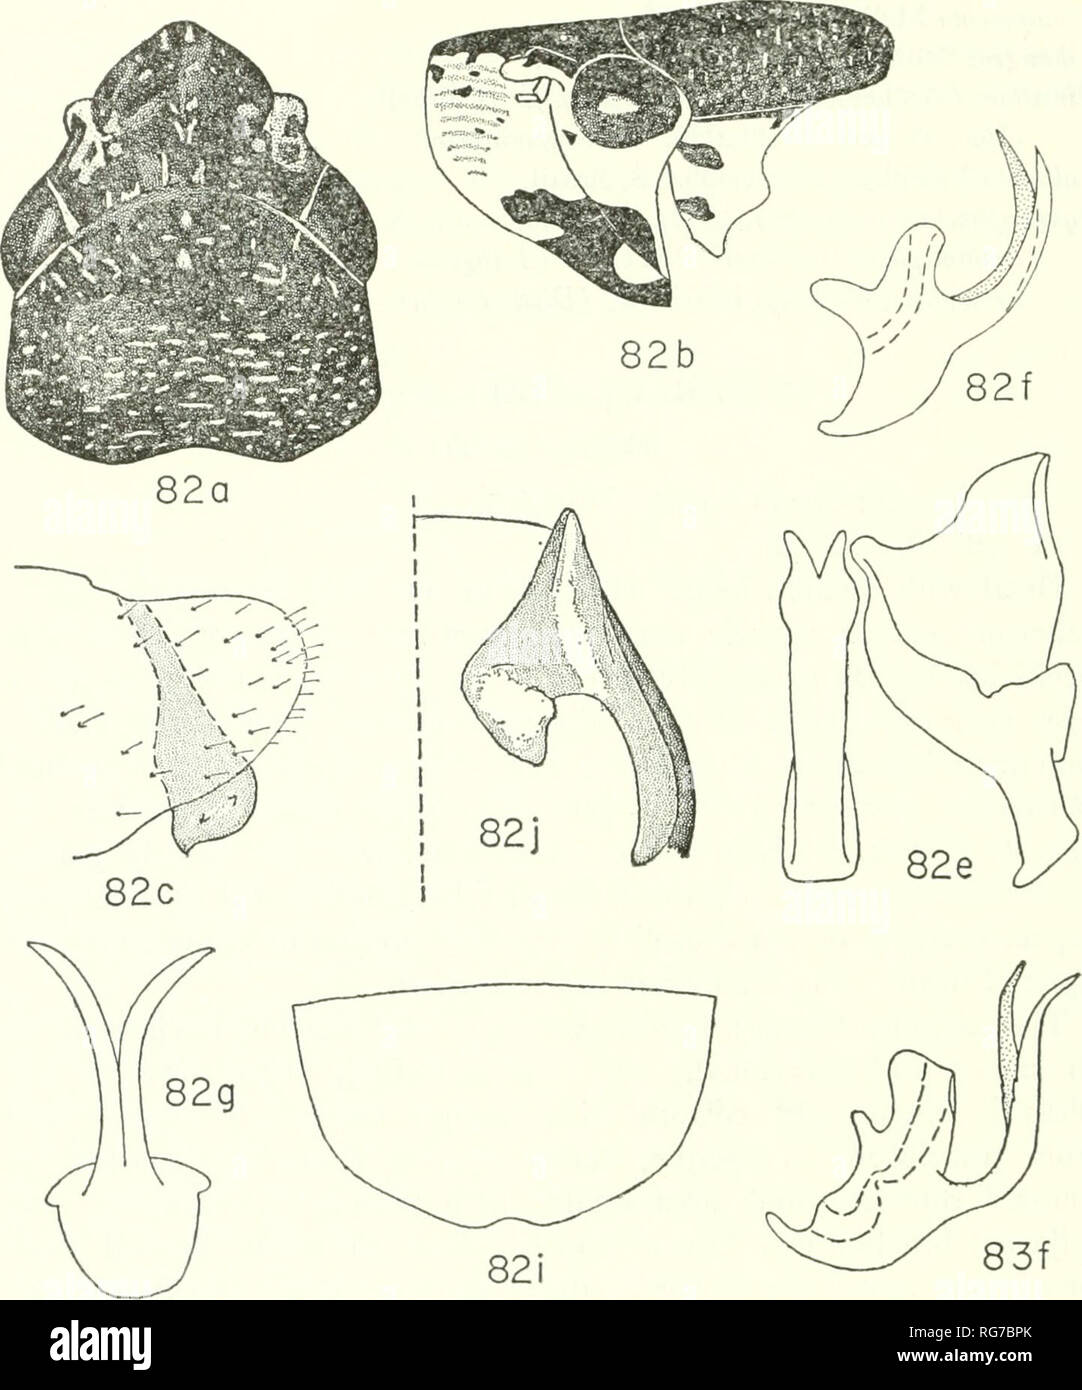 . Bulletin - United States National Museum. Science. 94 U.S. NATIONAL MUSEUM BULLETIN 261. Figures 82, 83.—82, Paraulacizes irrorata (Fabricius) (a and b from specimen from Virginia; c-g, j, from Florida (plate not shown in c); i, from Maryland): j, male pygofer, posterior view. 83, P. piperata (Fowler), topotype. shaped with stem much longer than slightly divergent arms. Aedeagus symmetrical, shaft very short with pair of slender, tapering ventral processes which greatly exceed shaft apex. Paraphyses absent. Female abdominal sternum VII variable interspecifically. Species of Paraulacizes are  Stock Photo